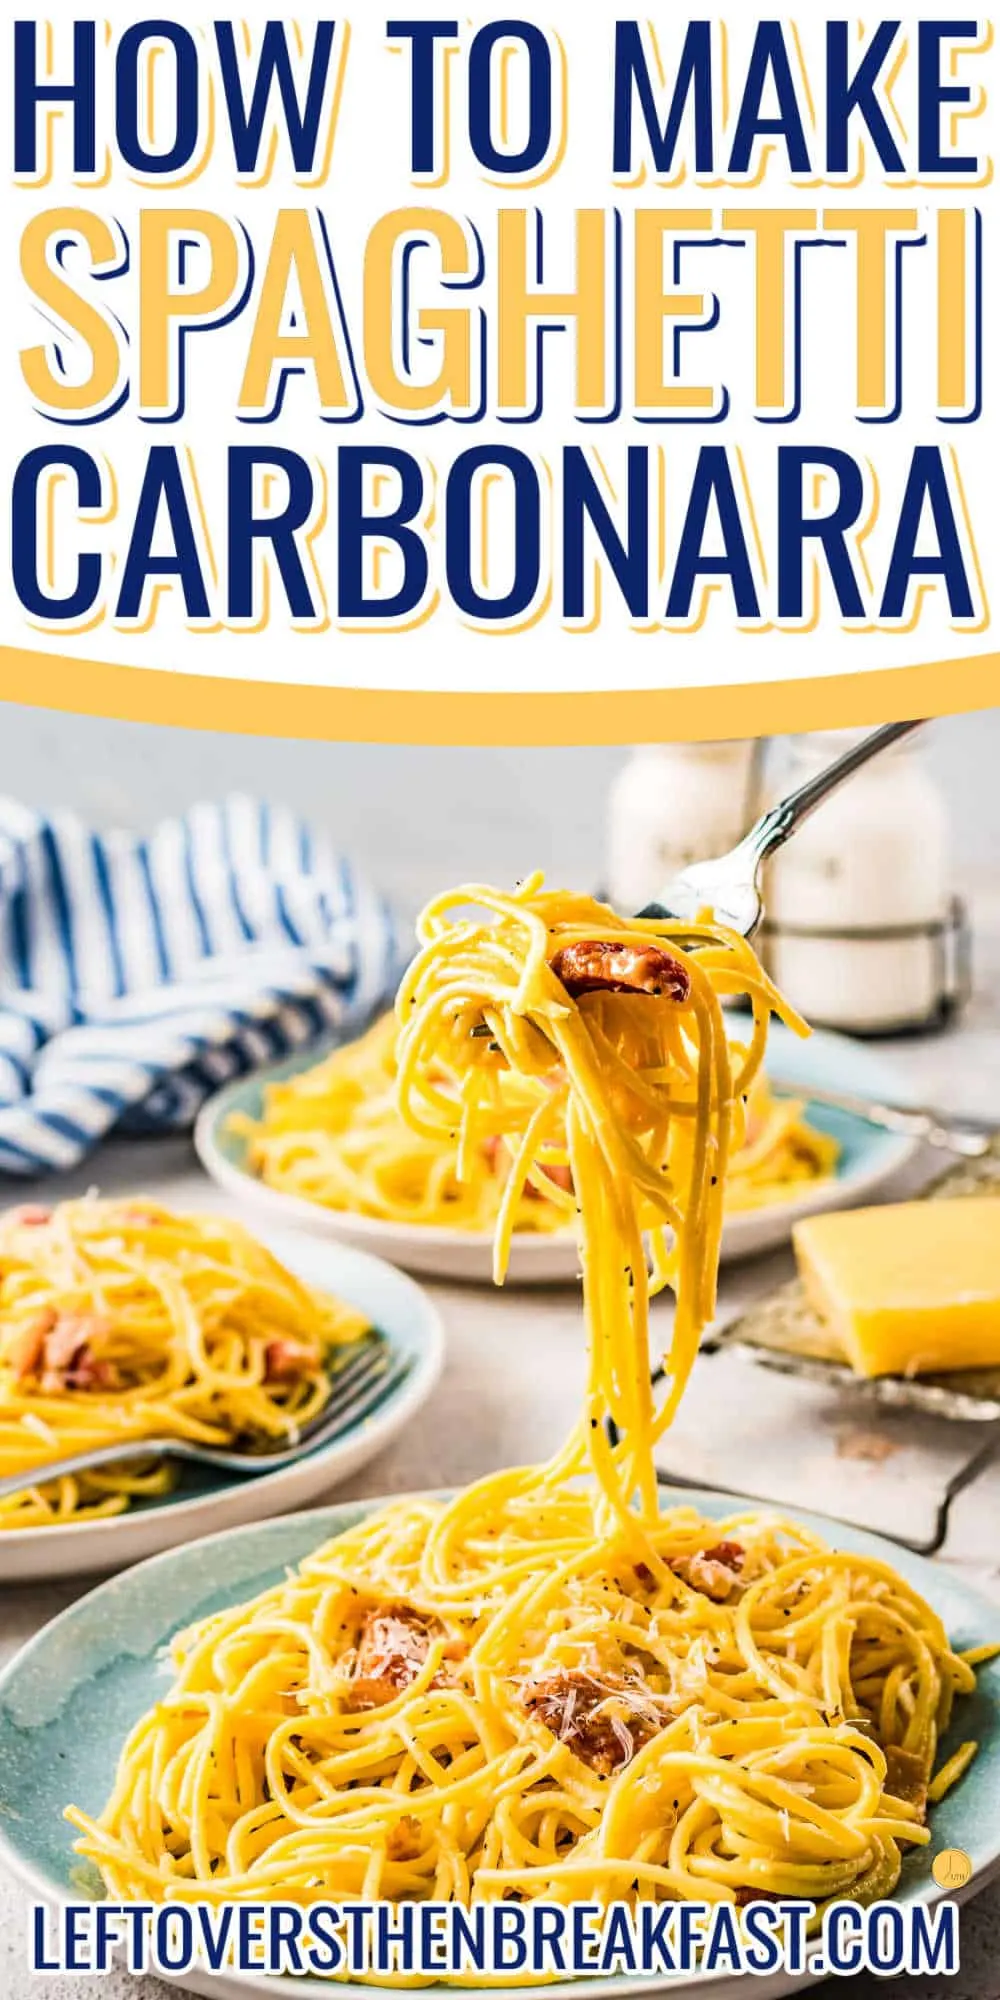 Spaghetti Carbonara on a plate with a forkful of it being lifted up in mid-air. There are two other plates of spaghetti carbonara in the background, and it is all sitting on a table and a text box at the top saying "How to make spaghetti carbonara."